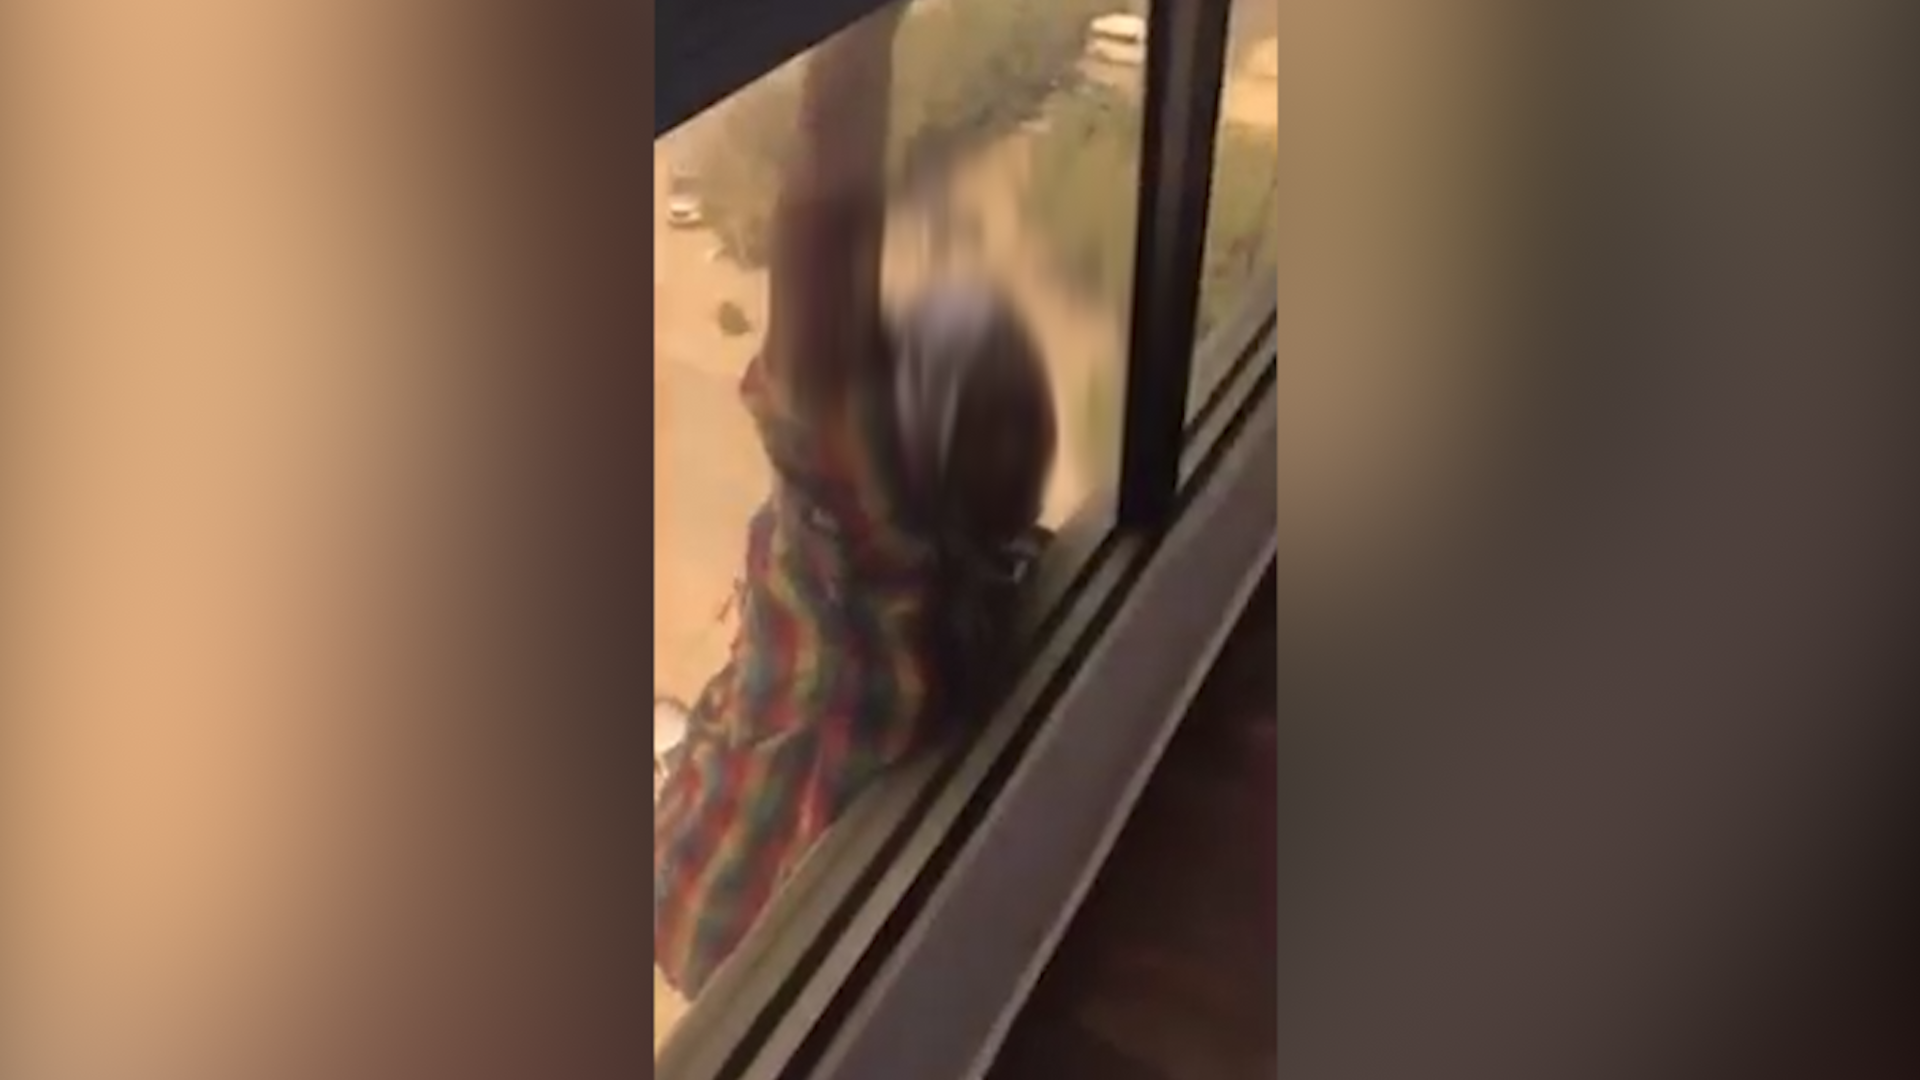 A maid begged for help before falling from a window in Kuwait. Her boss  made a video instead. - The Washington Post